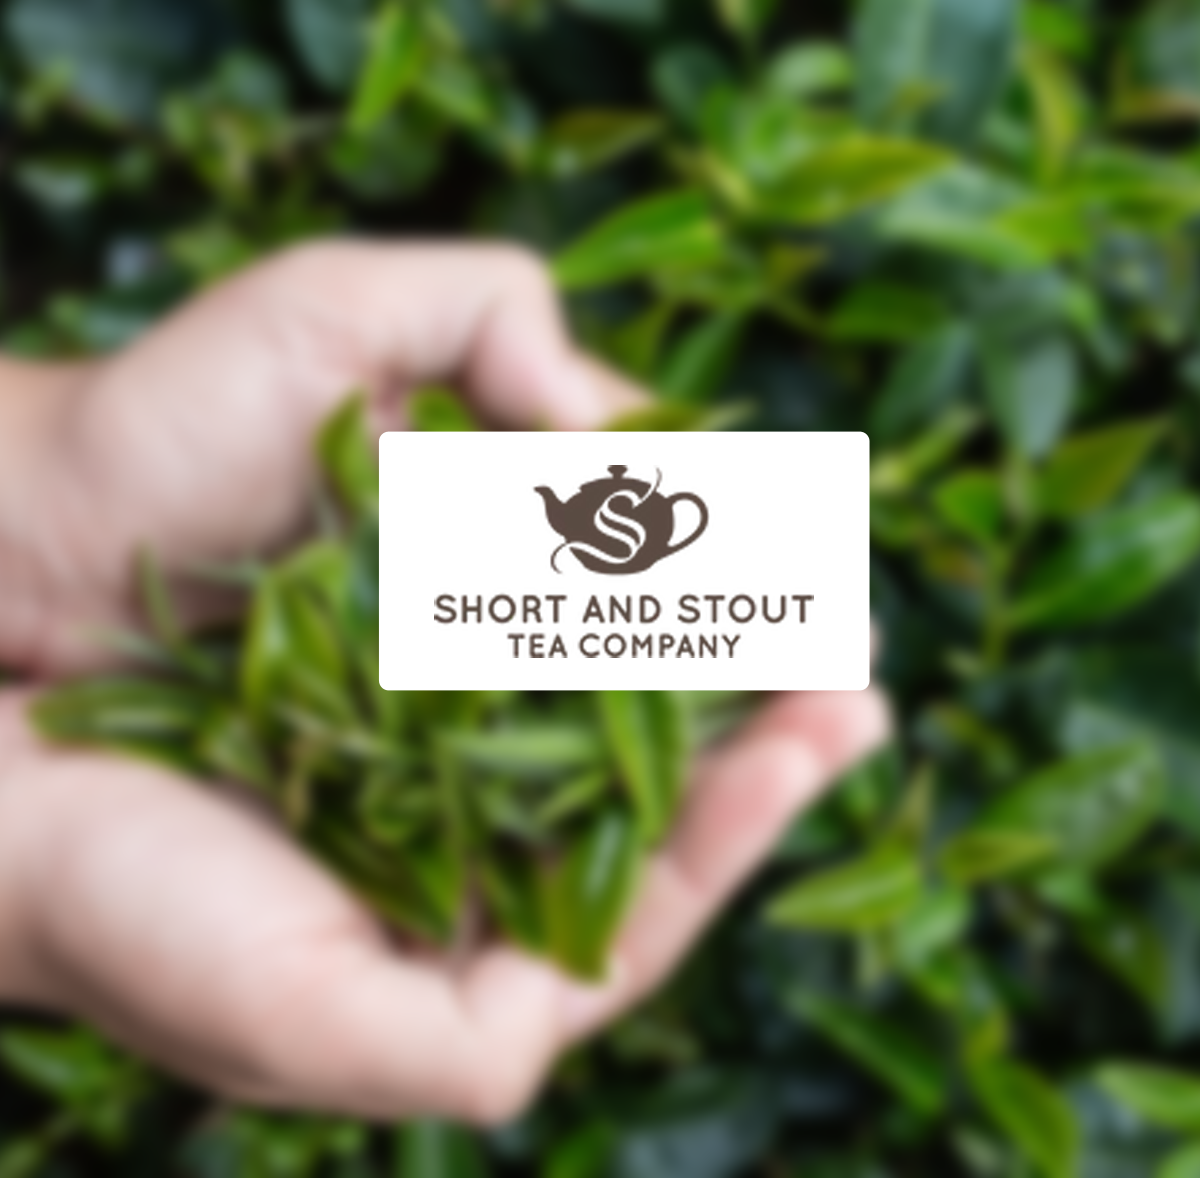 What’s Brewing at Short and Stout in January